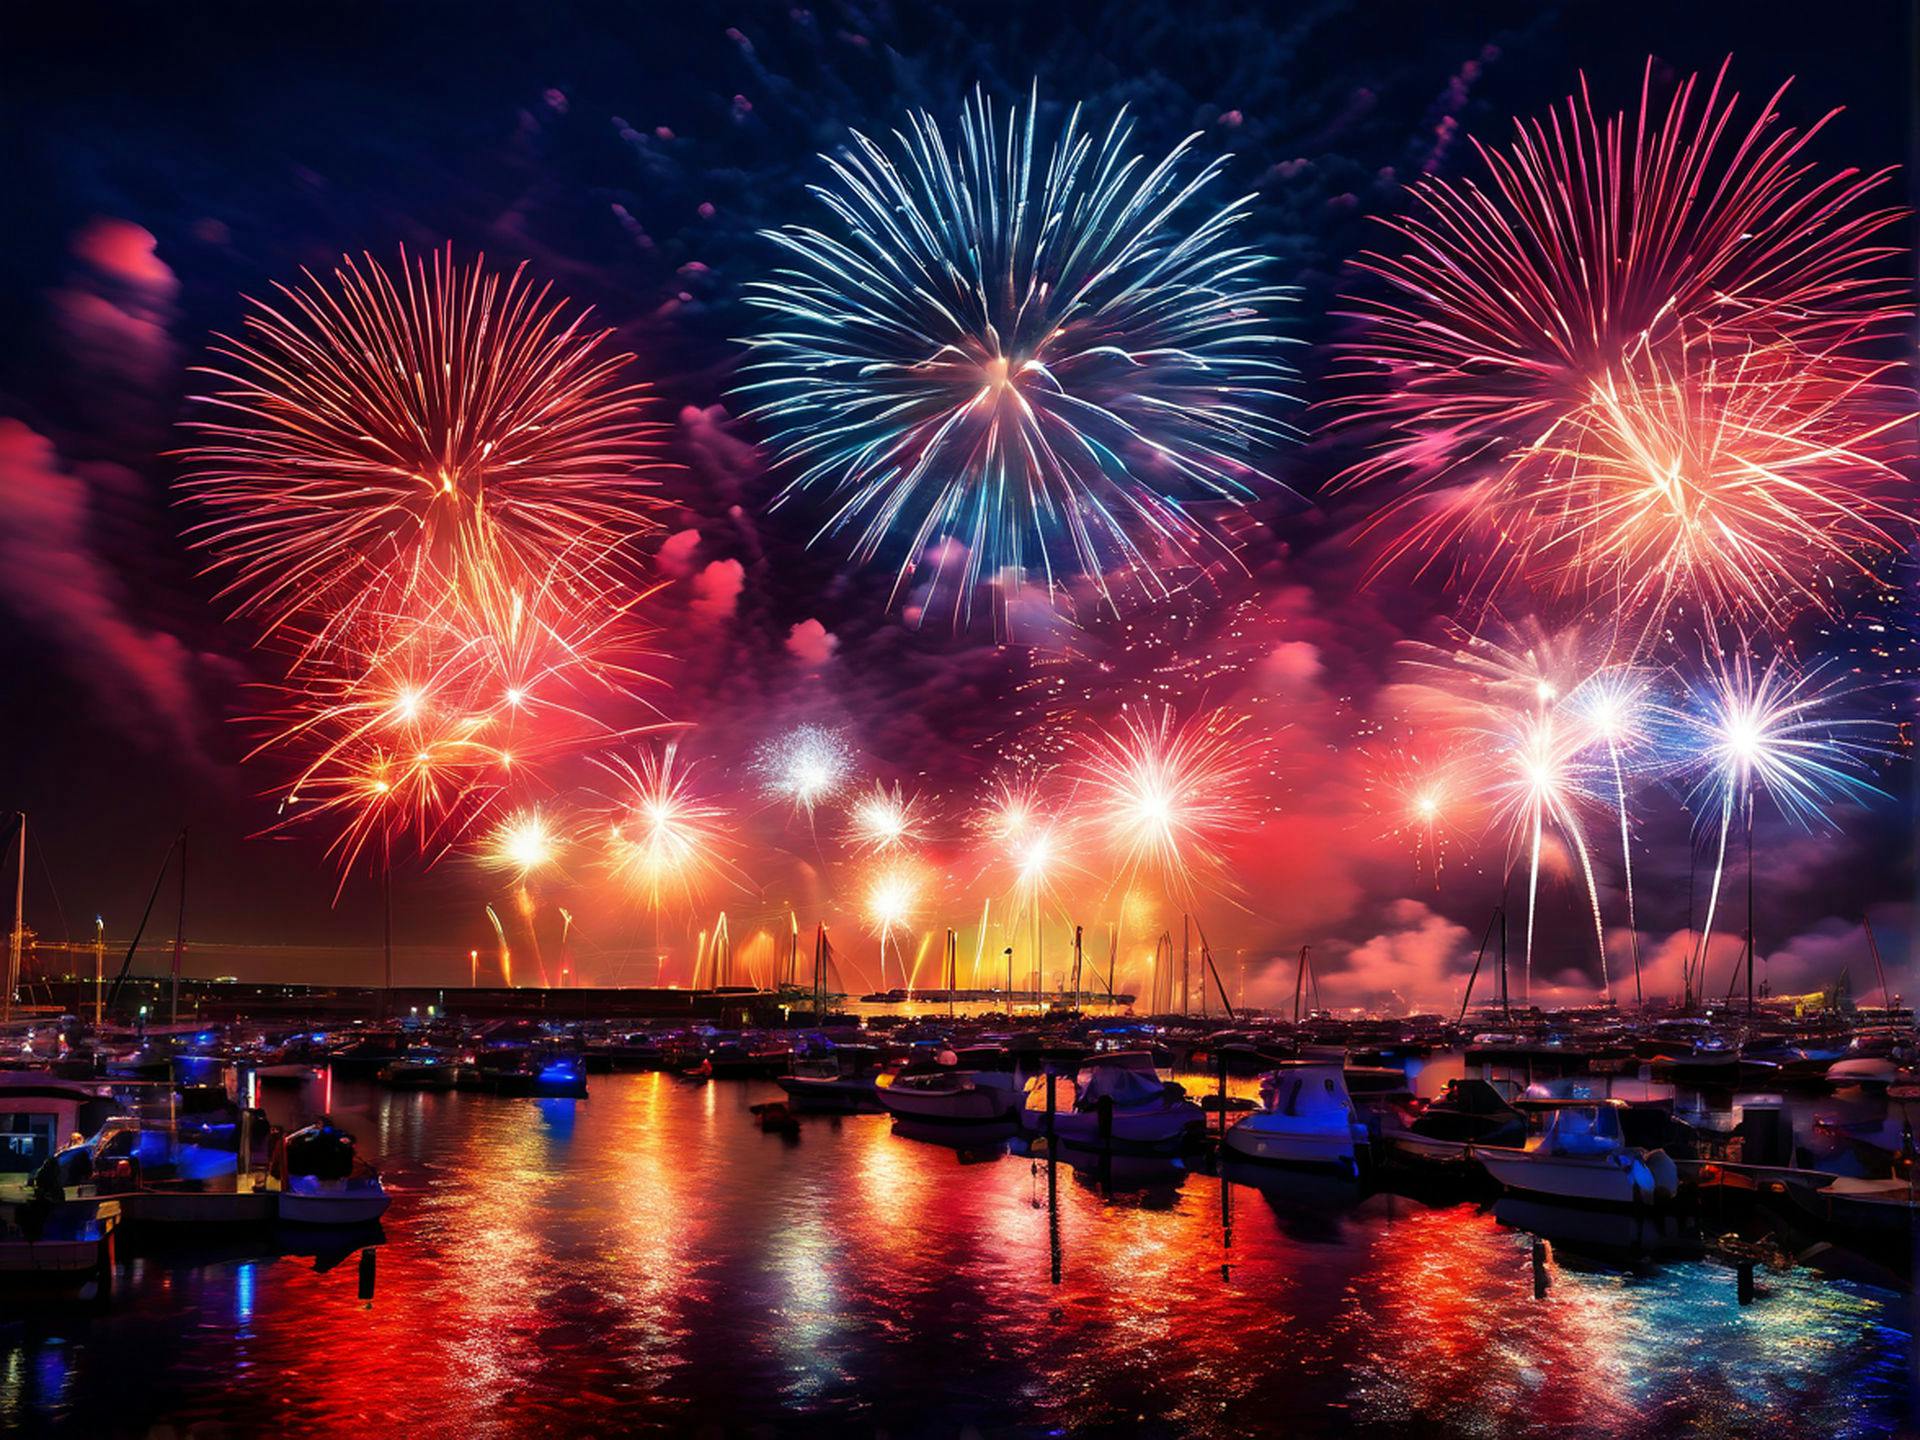 Vibrant Fireworks Display Over the Harbor for New Year's Eve